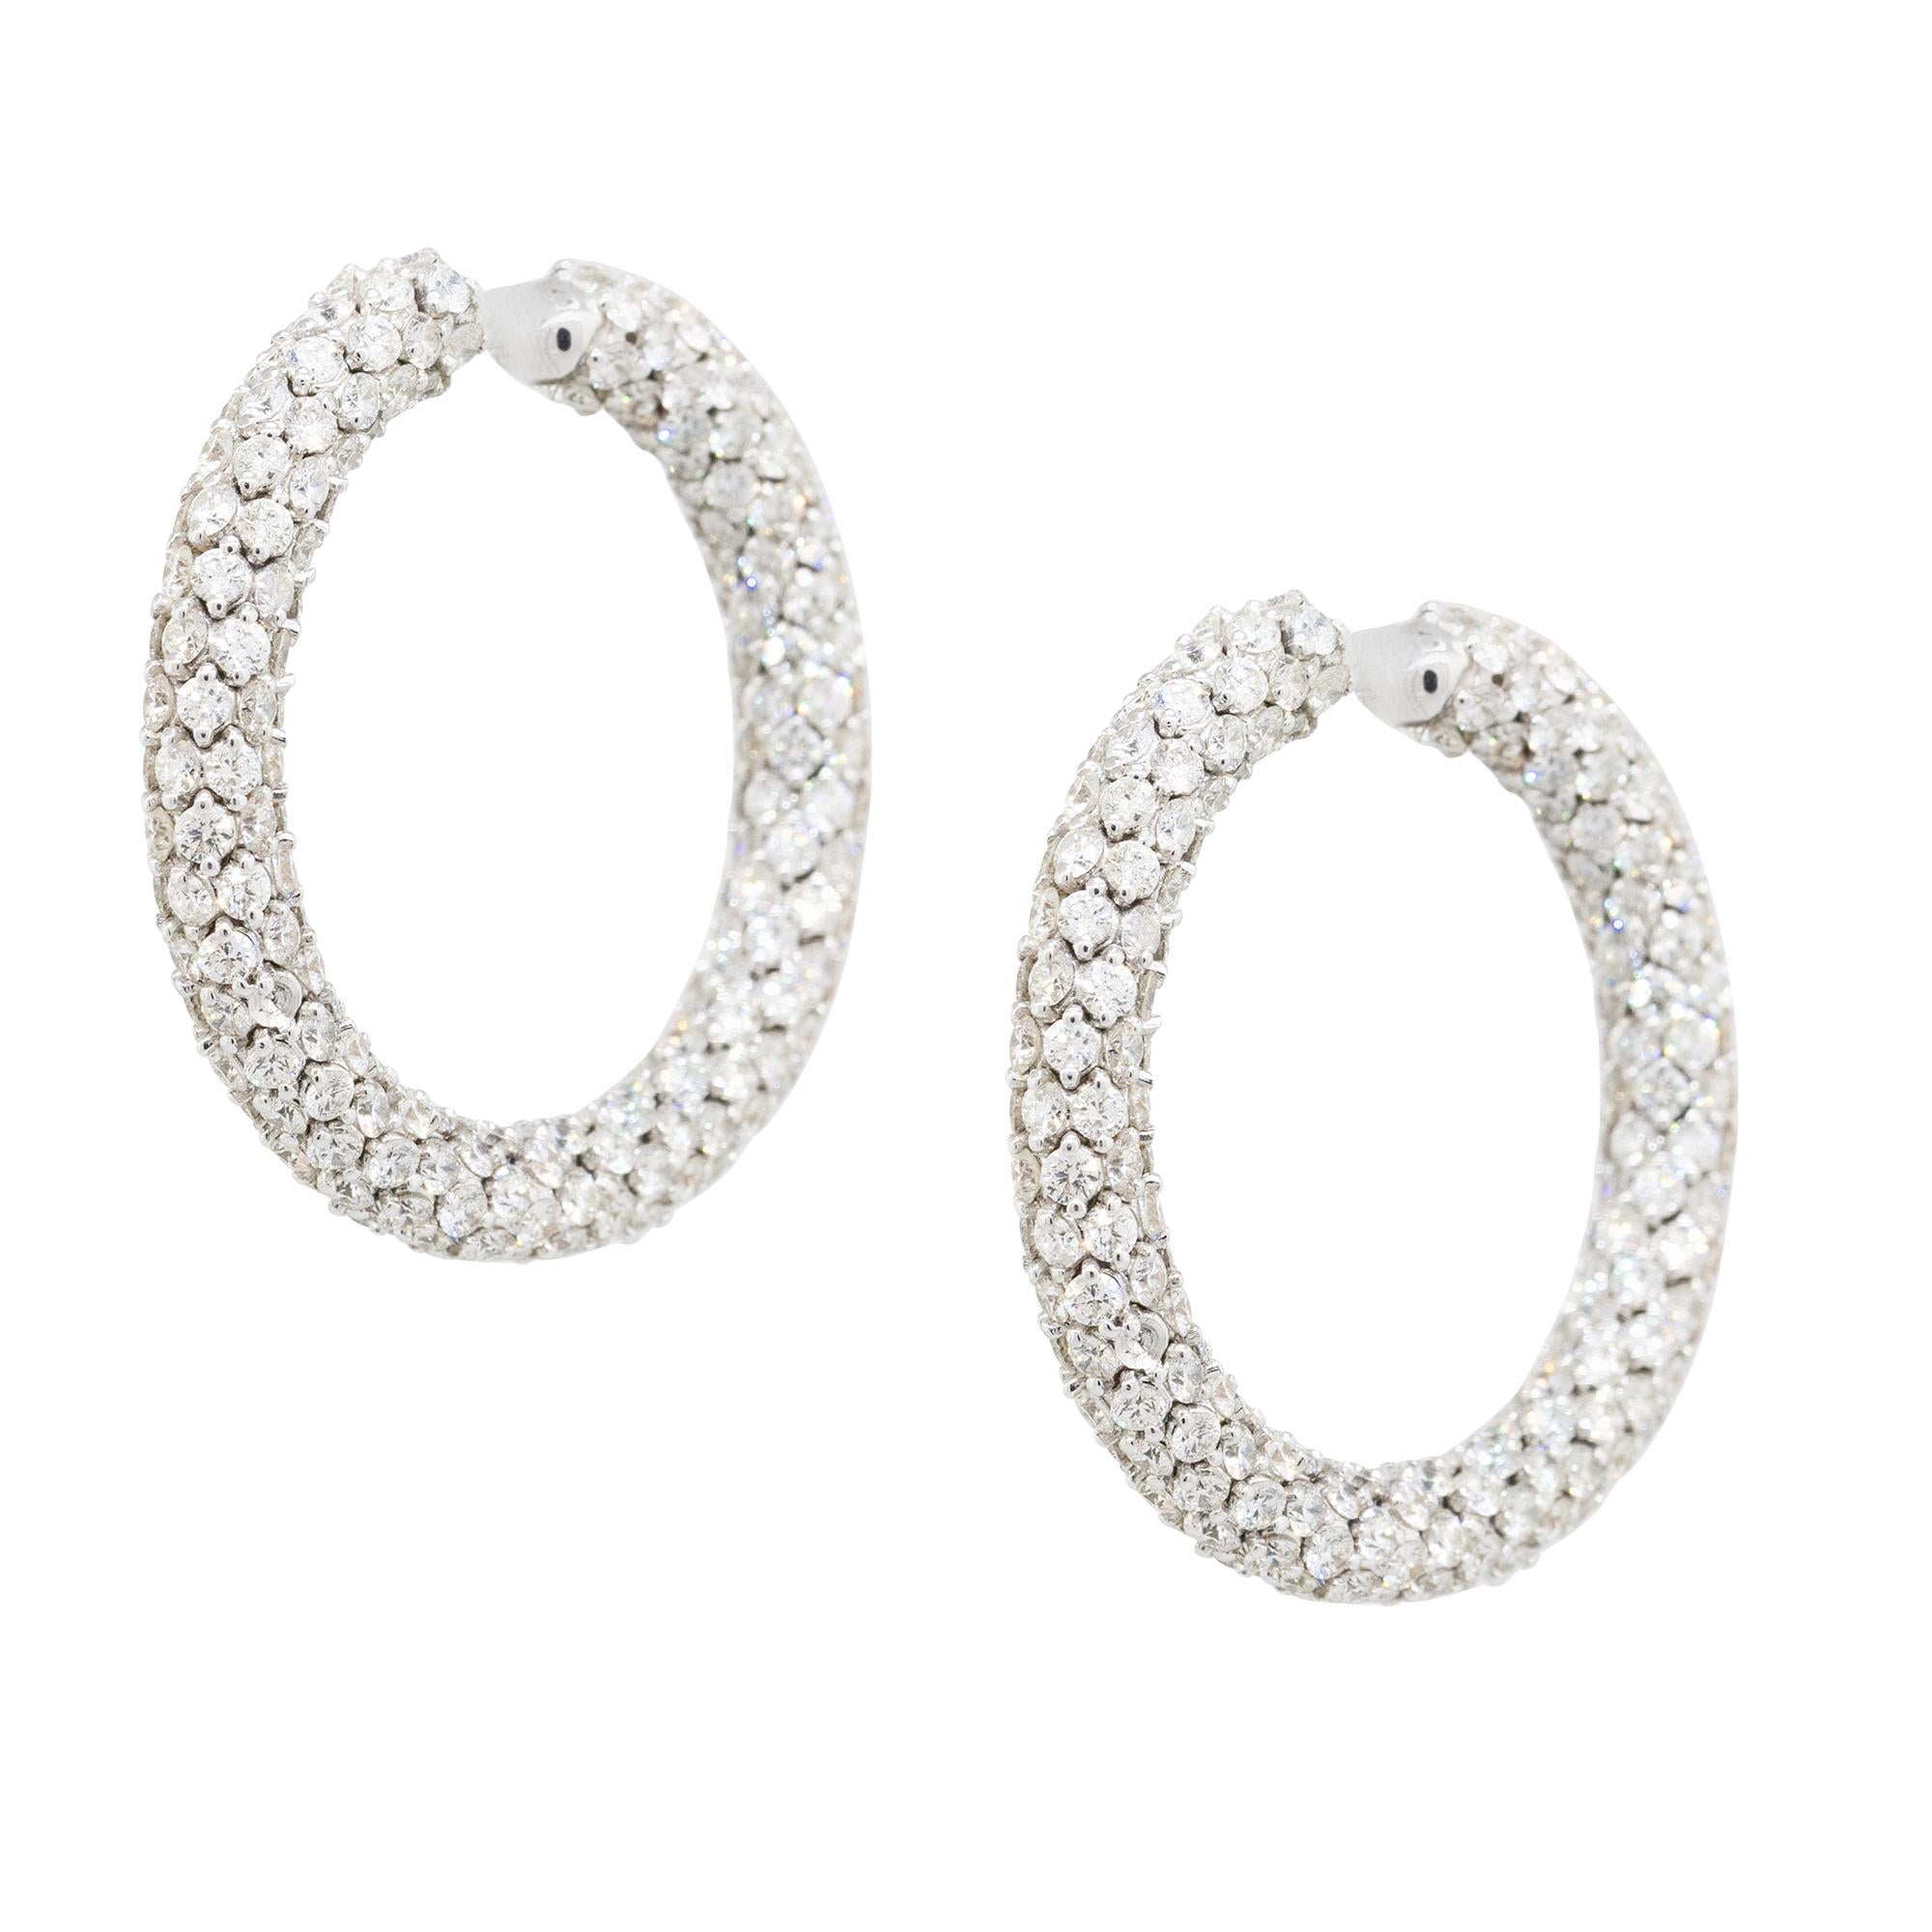 16.52 Carat All Diamond Pave Hoop Earrings 18 Karat In Stock In New Condition For Sale In Boca Raton, FL